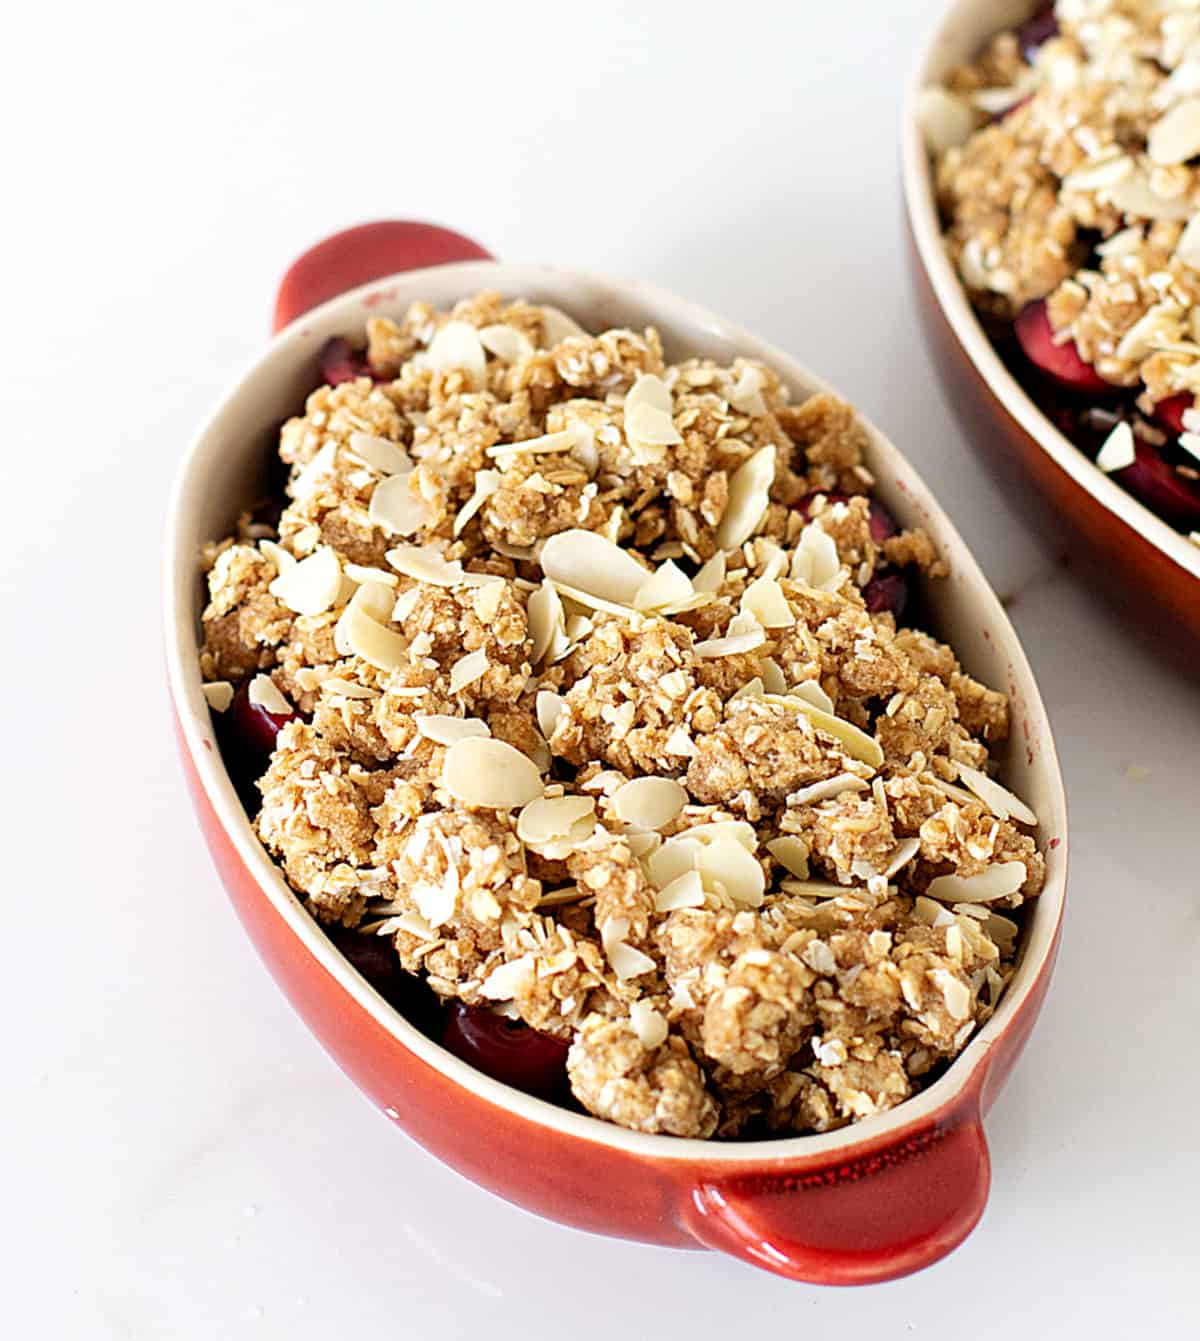 Unbaked cherry oat crumble in red oval dish on white table